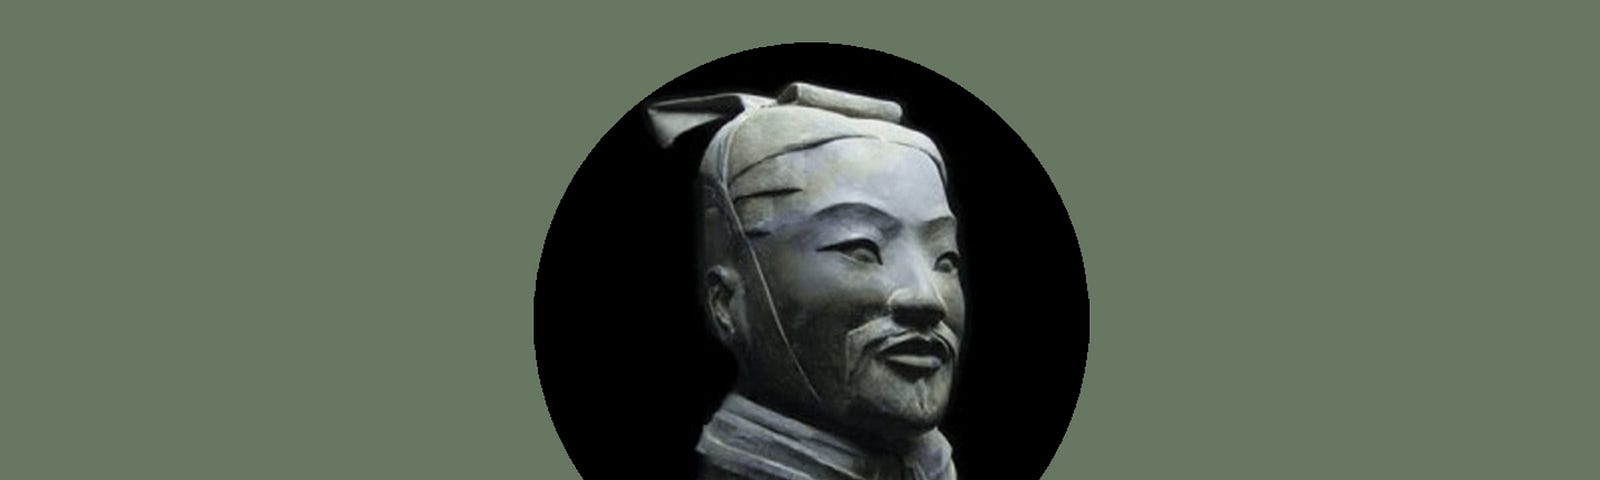 Many of Sun Tzu’s lessons apply to us today